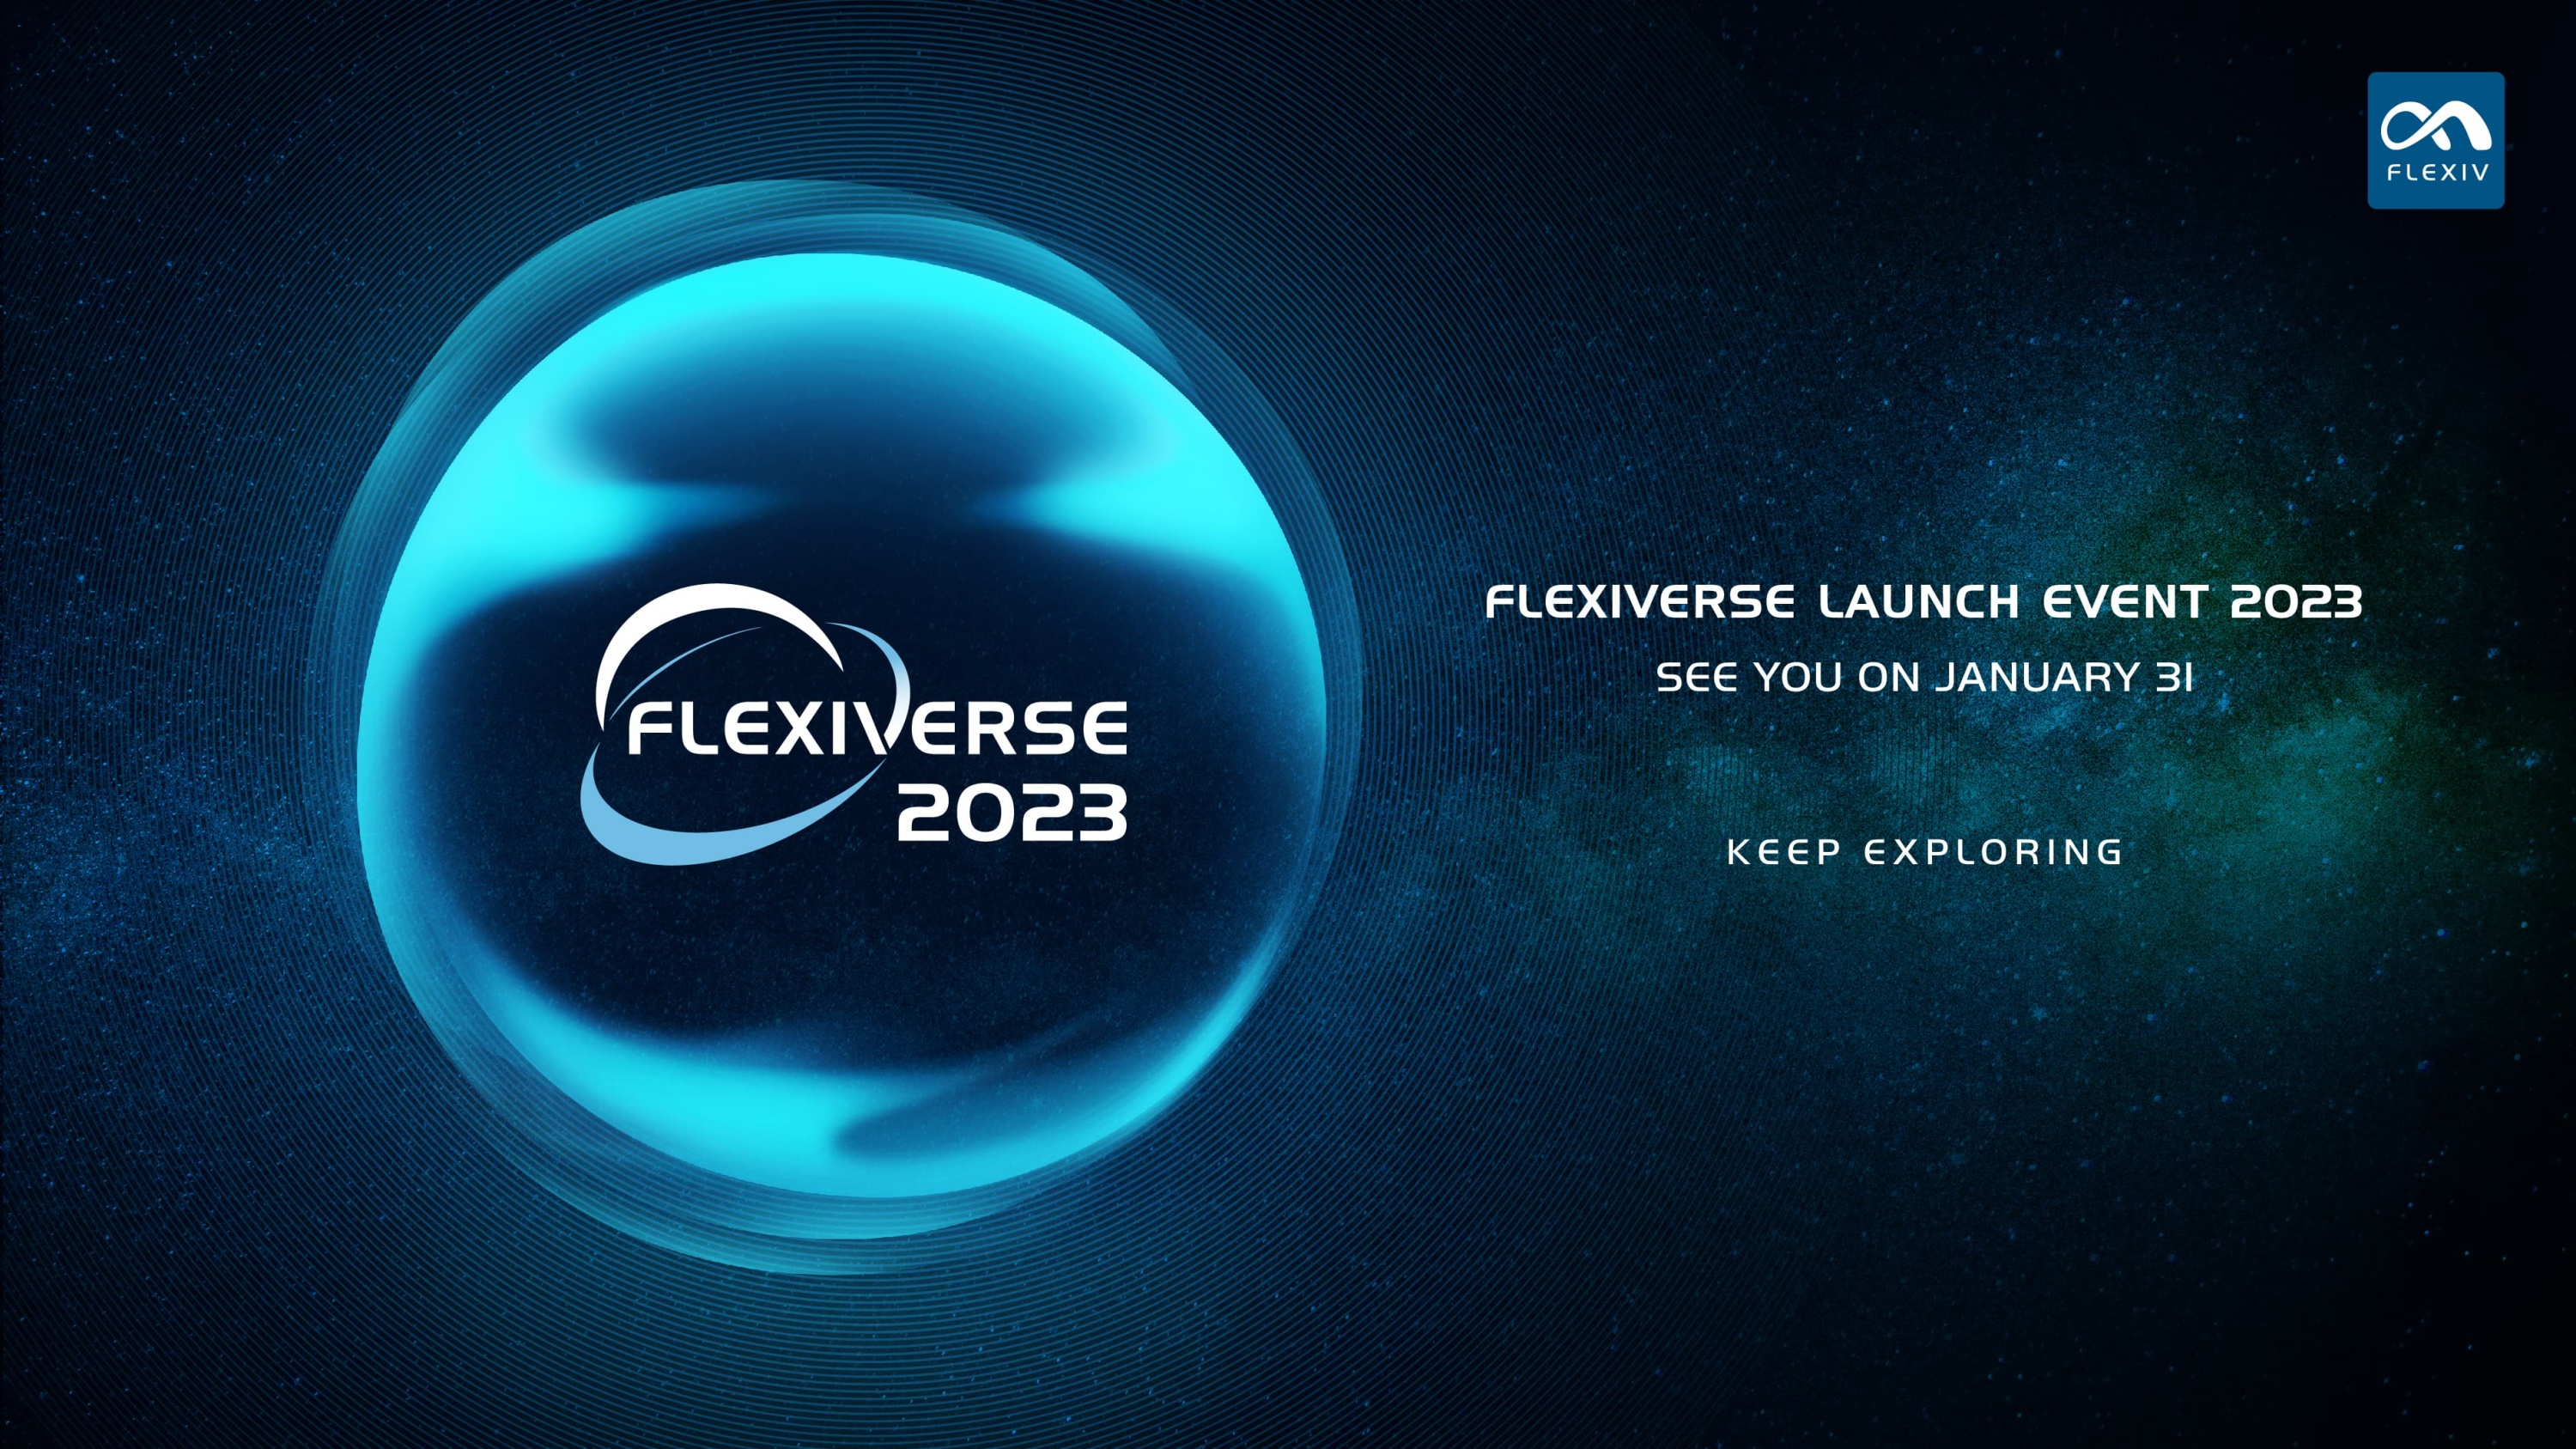 Flexiv Set to Unveil New Products During Their Upcoming Flexiverse: 2023 Event